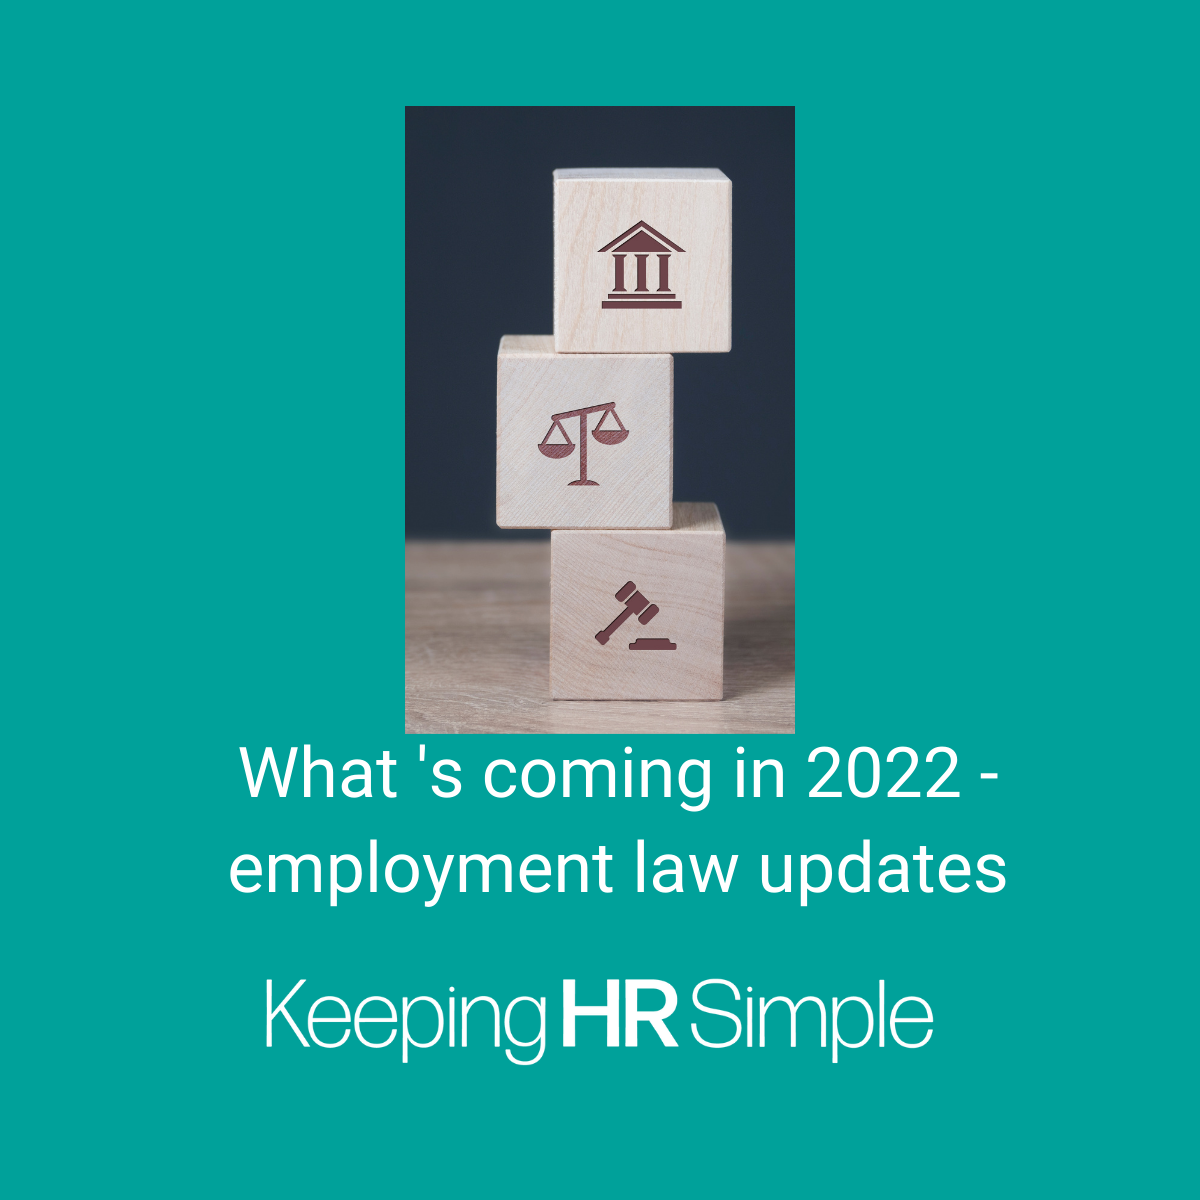 employment law updates what's coming in 2022